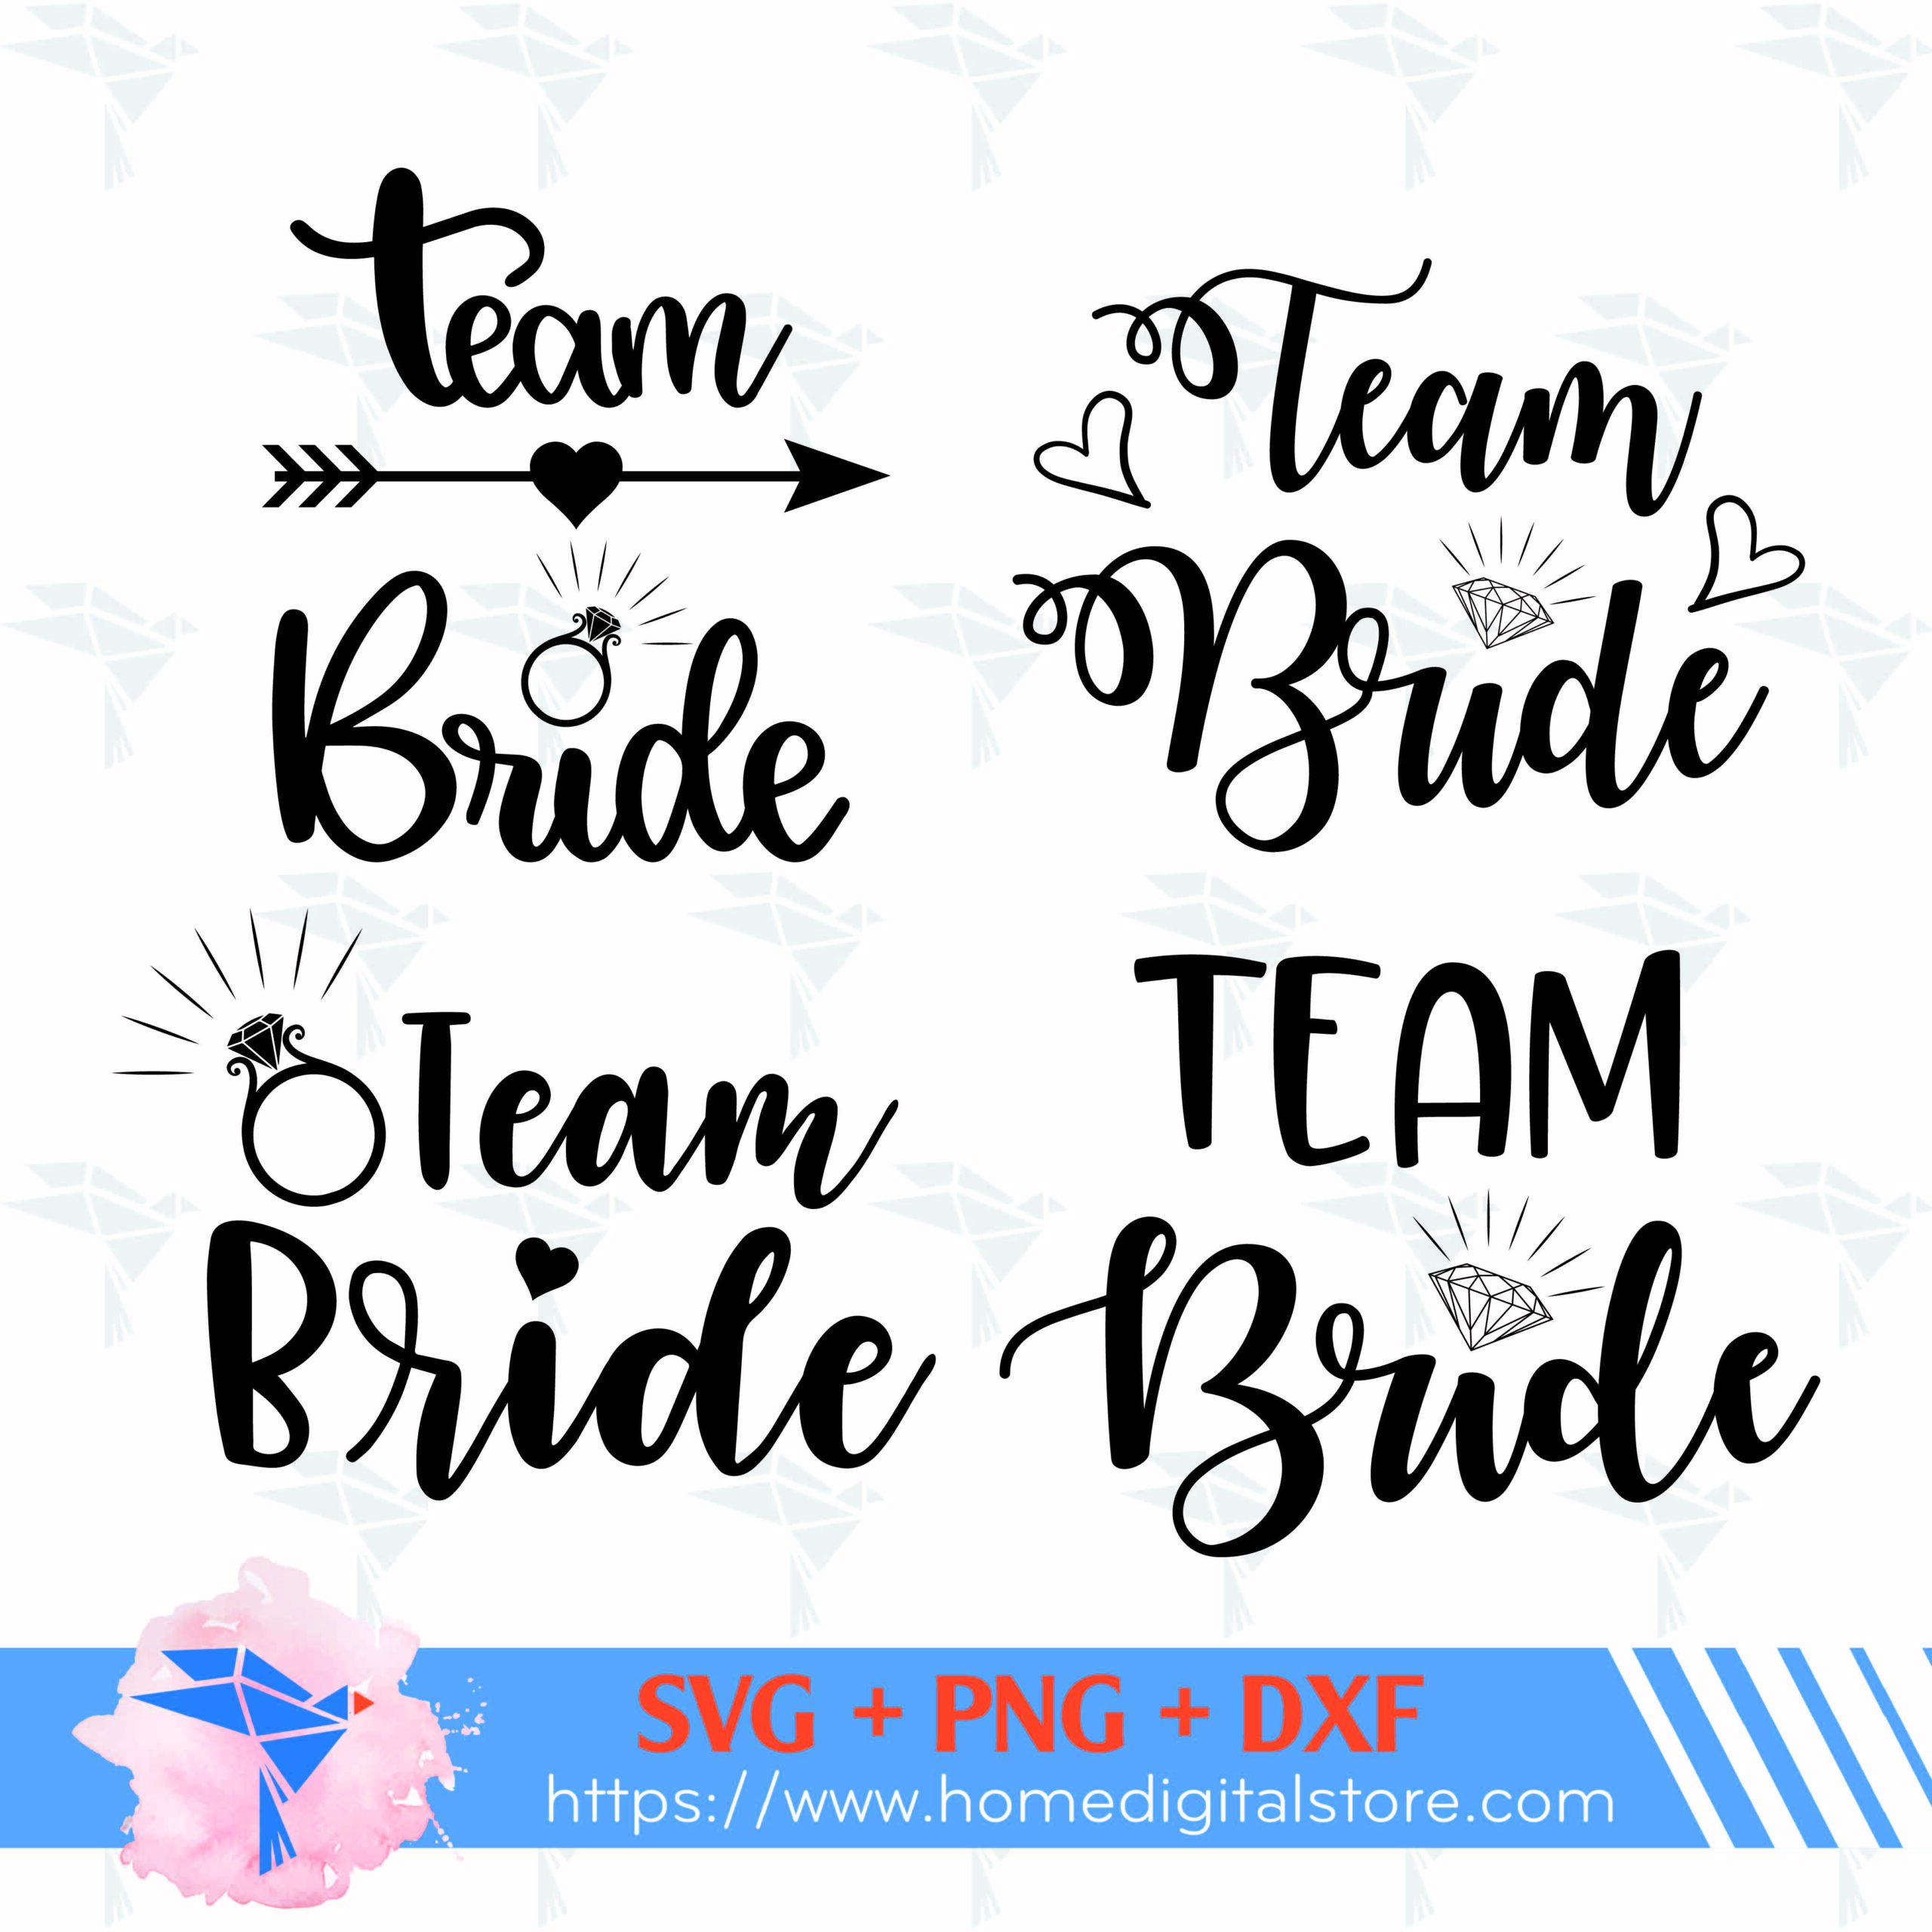 Team Bride SVG, PNG, DXF. Instant download files for Cricut Design Space,  Silhouette, Cutting, Printing, or more